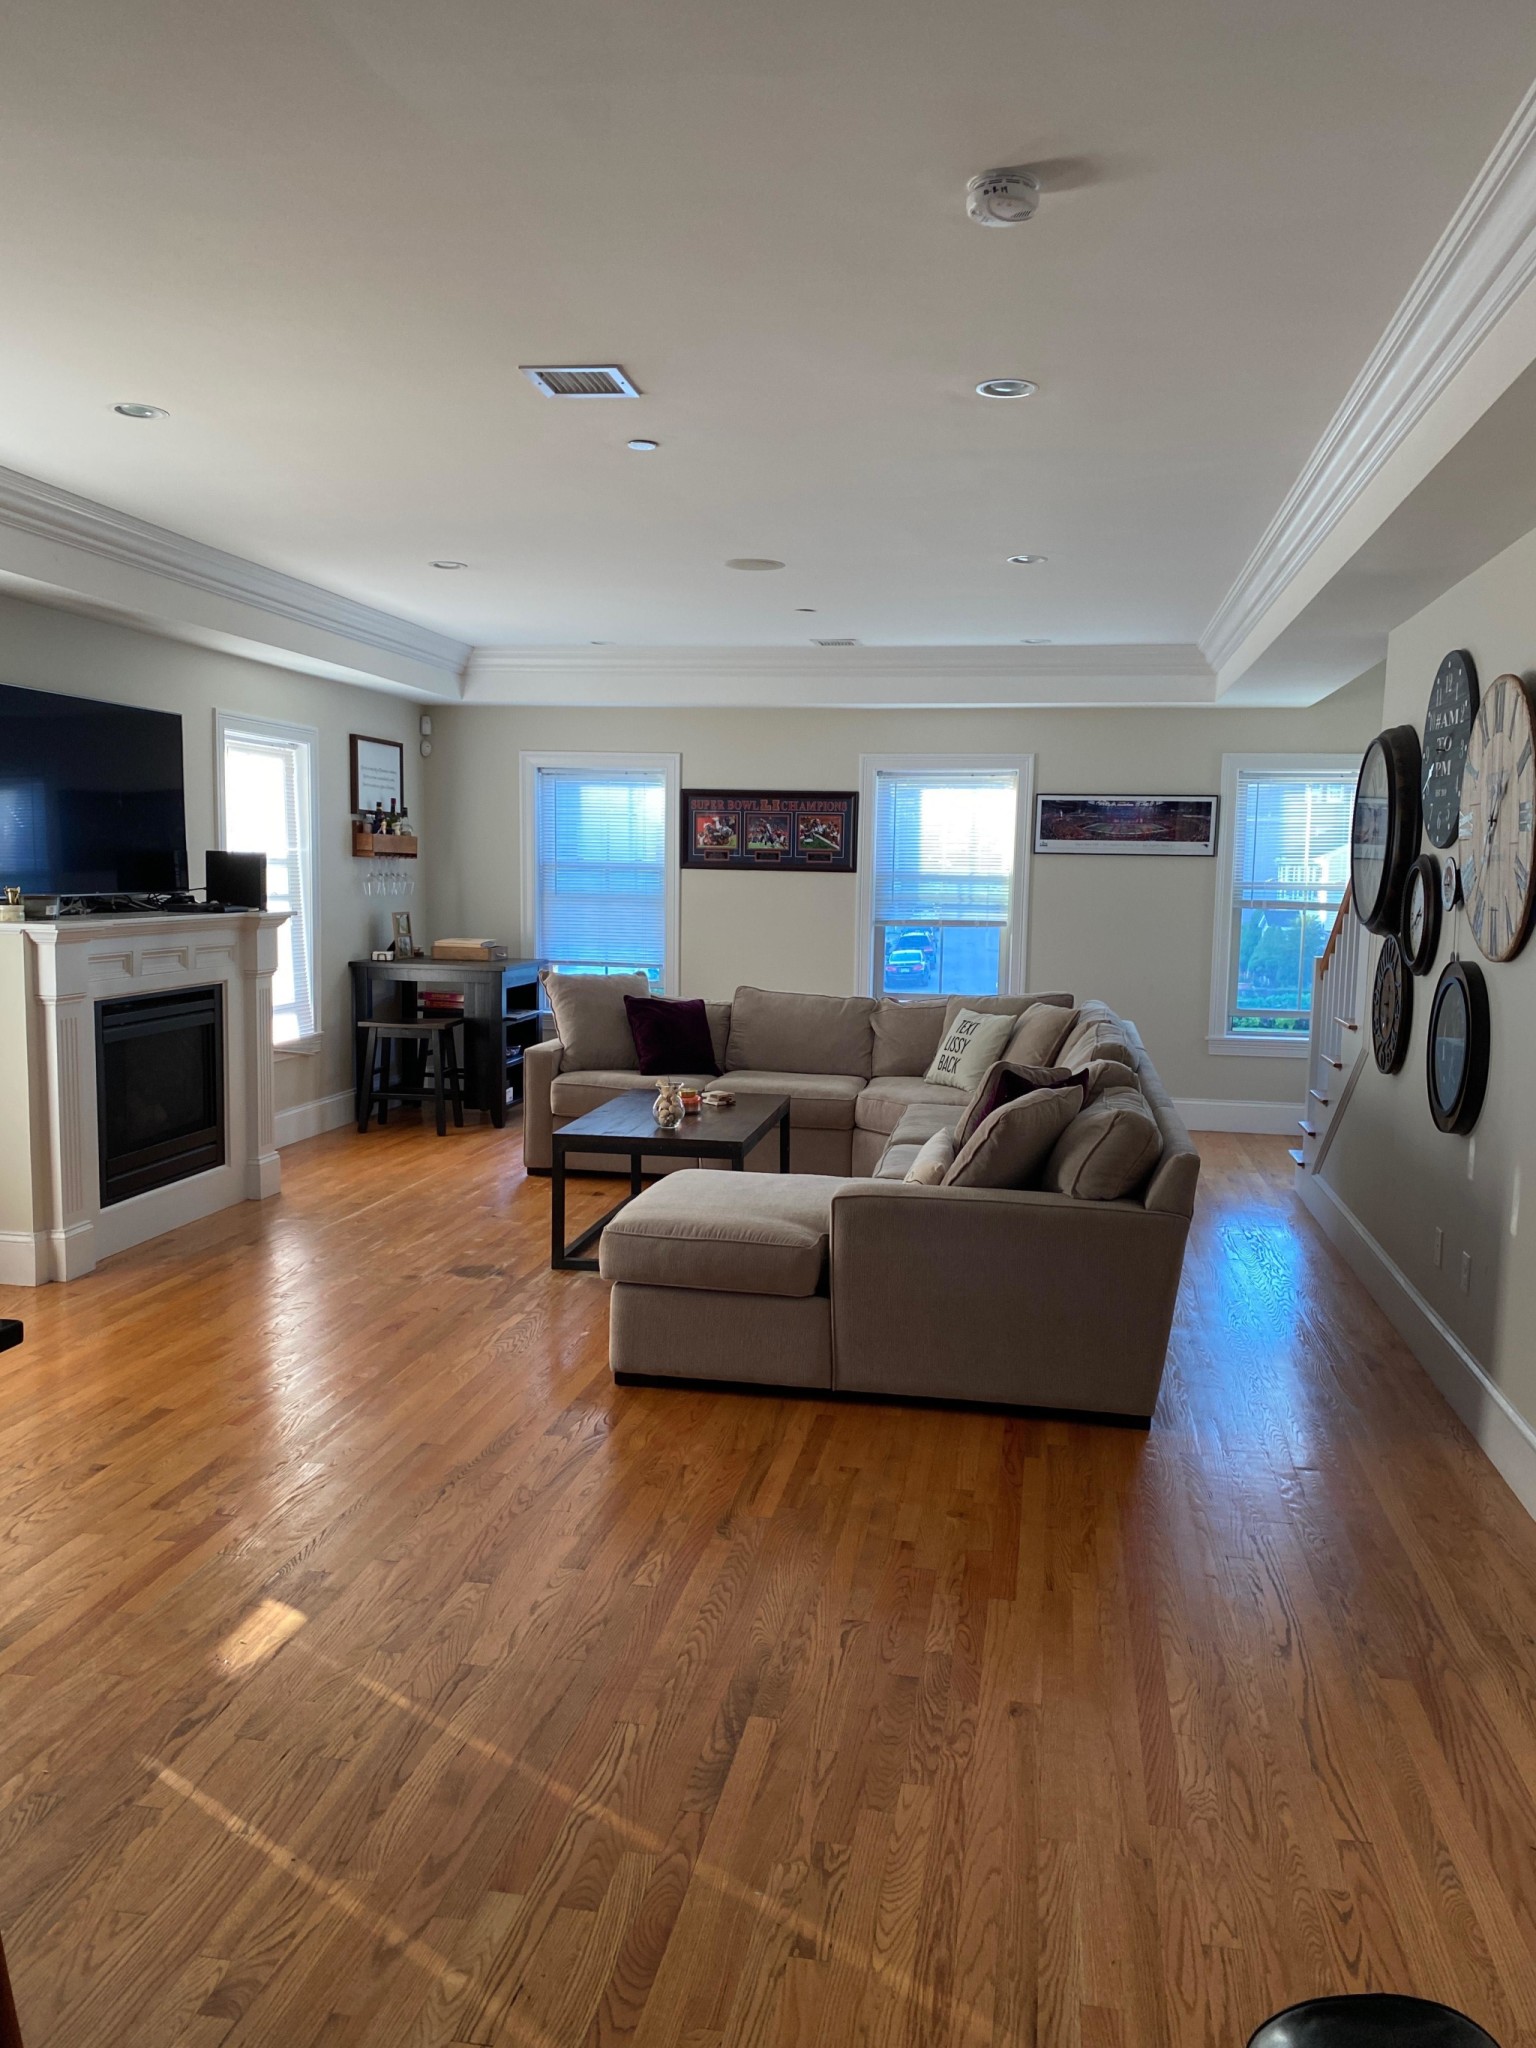 2 Beds, 1.5 Baths apartment in Boston, Dorchester for $2,500